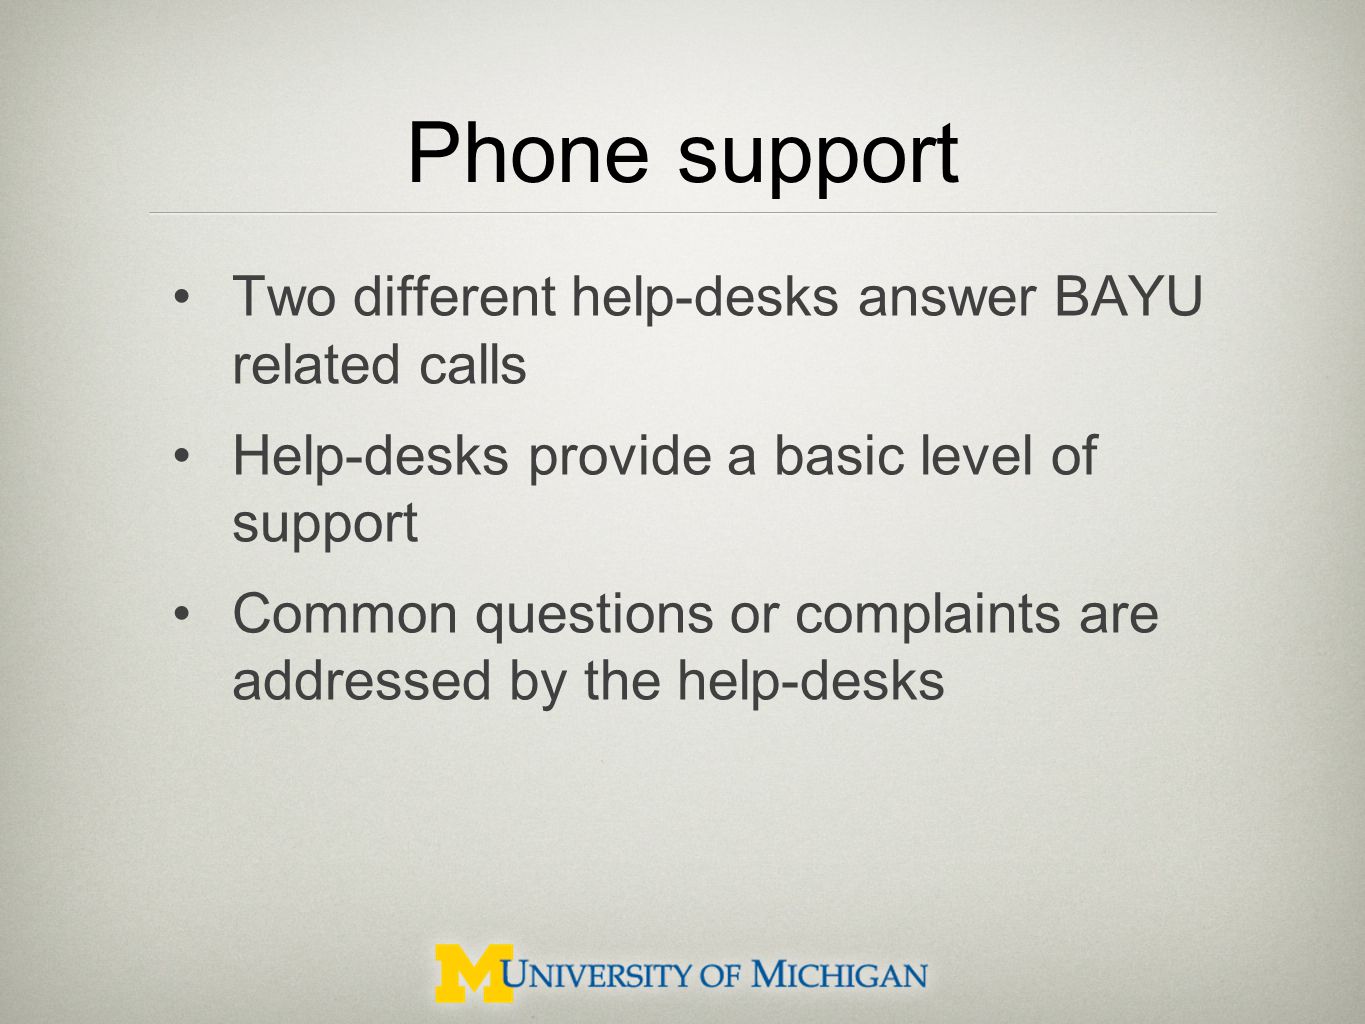 Phone support Two different help-desks answer BAYU related calls Help-desks provide a basic level of support Common questions or complaints are addressed by the help-desks